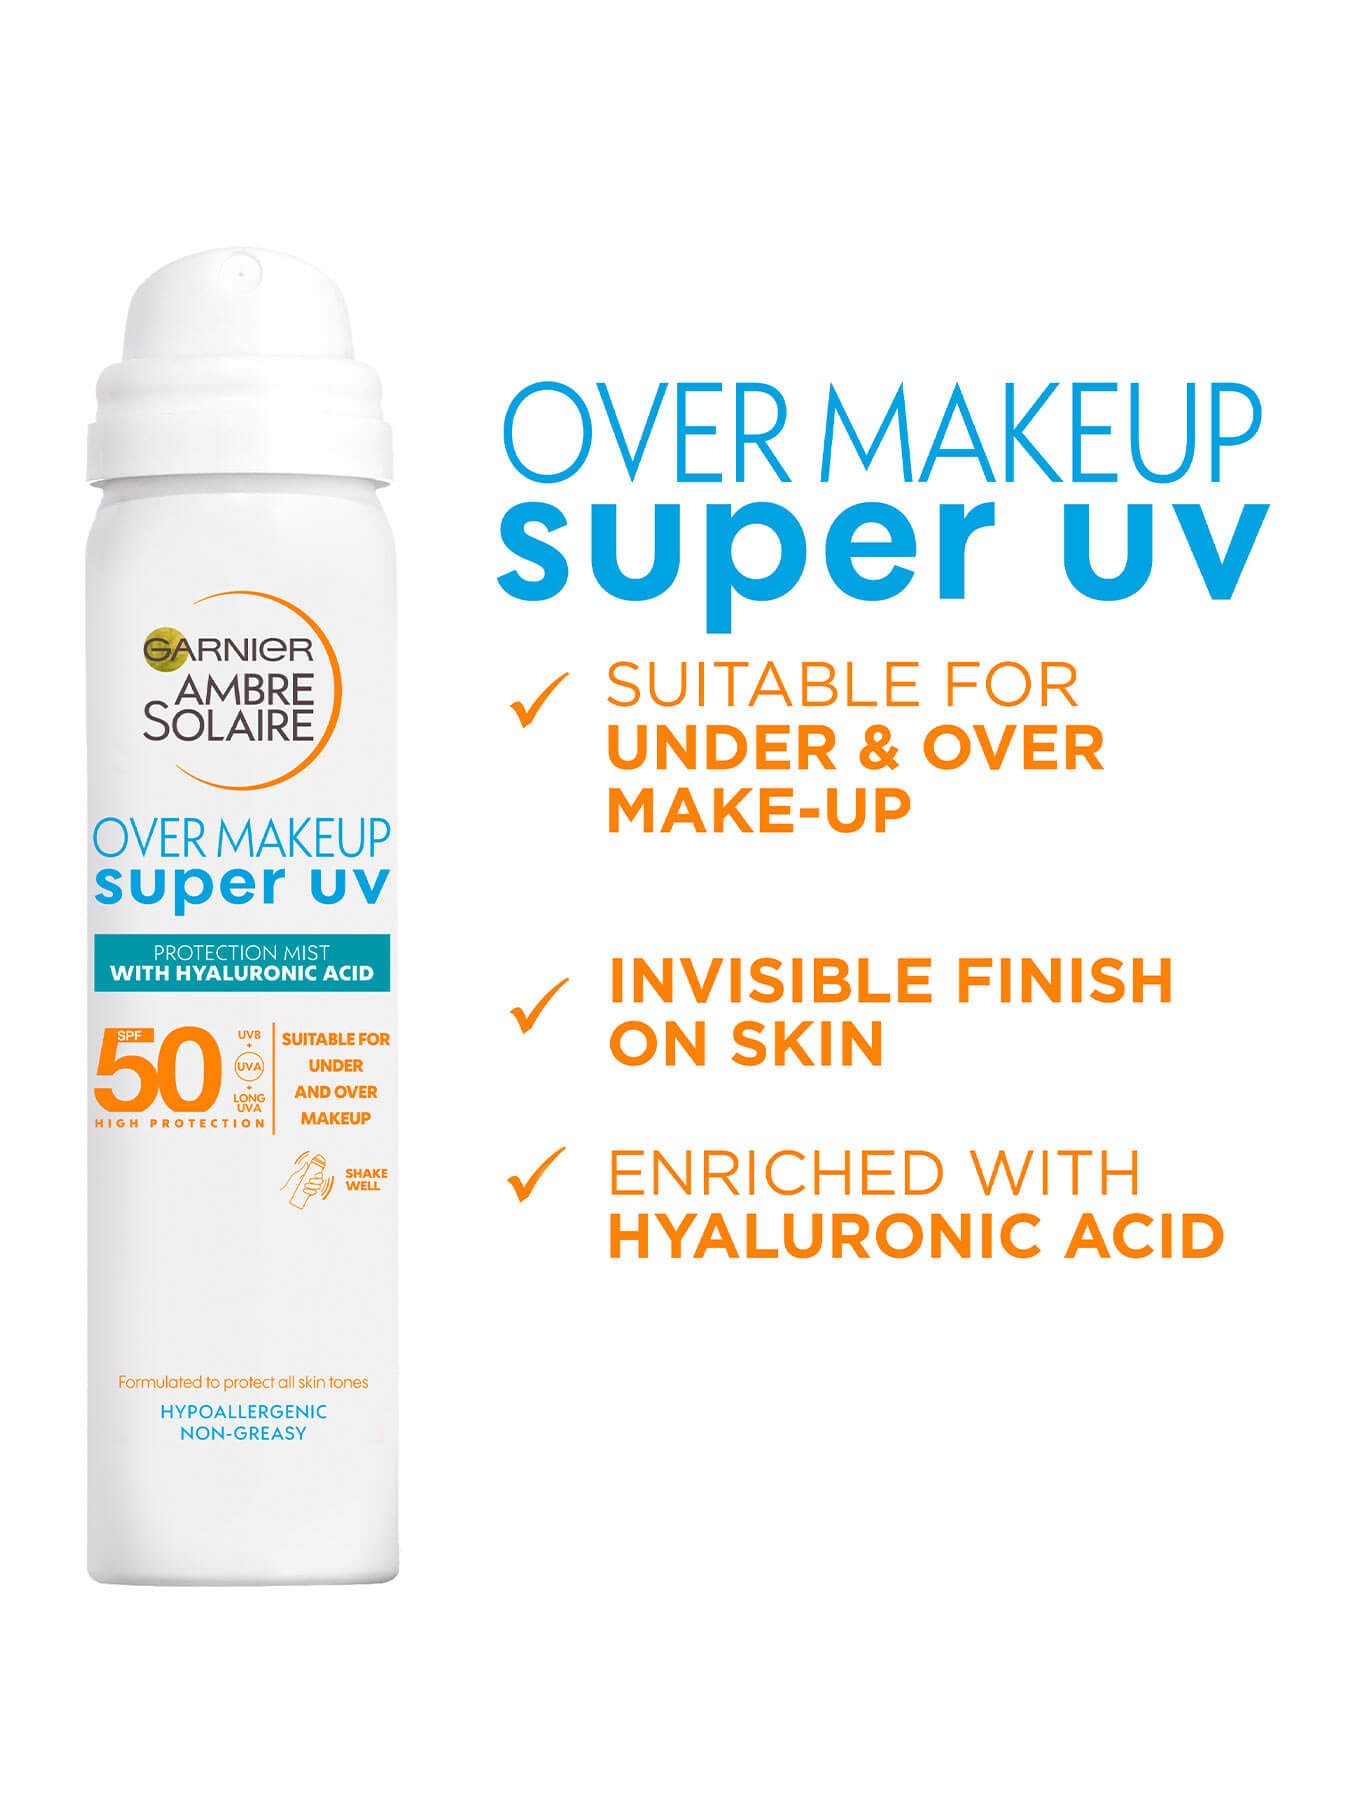 Ambre Solaire Super UV over makeup mist with benefits listed